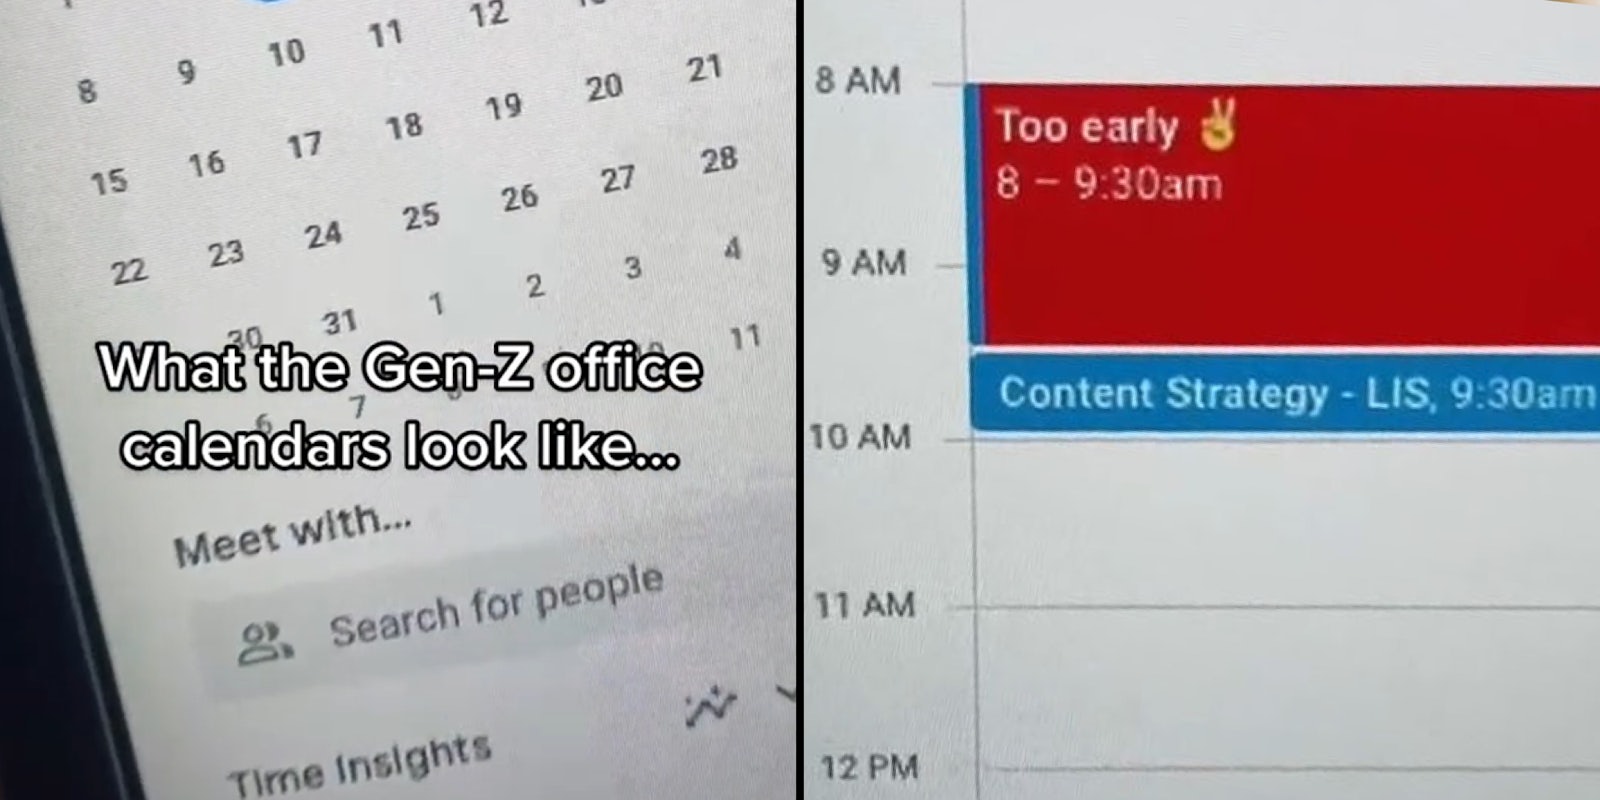 Laptop screen with calendar caption 'What Gen-Z office calendars look like...' (l) laptop screen with morning timeline at 8 AM caption 'Too early (peace sign emoji) 8-9:30am Content Strategy - LIS, 9:30am' (r)